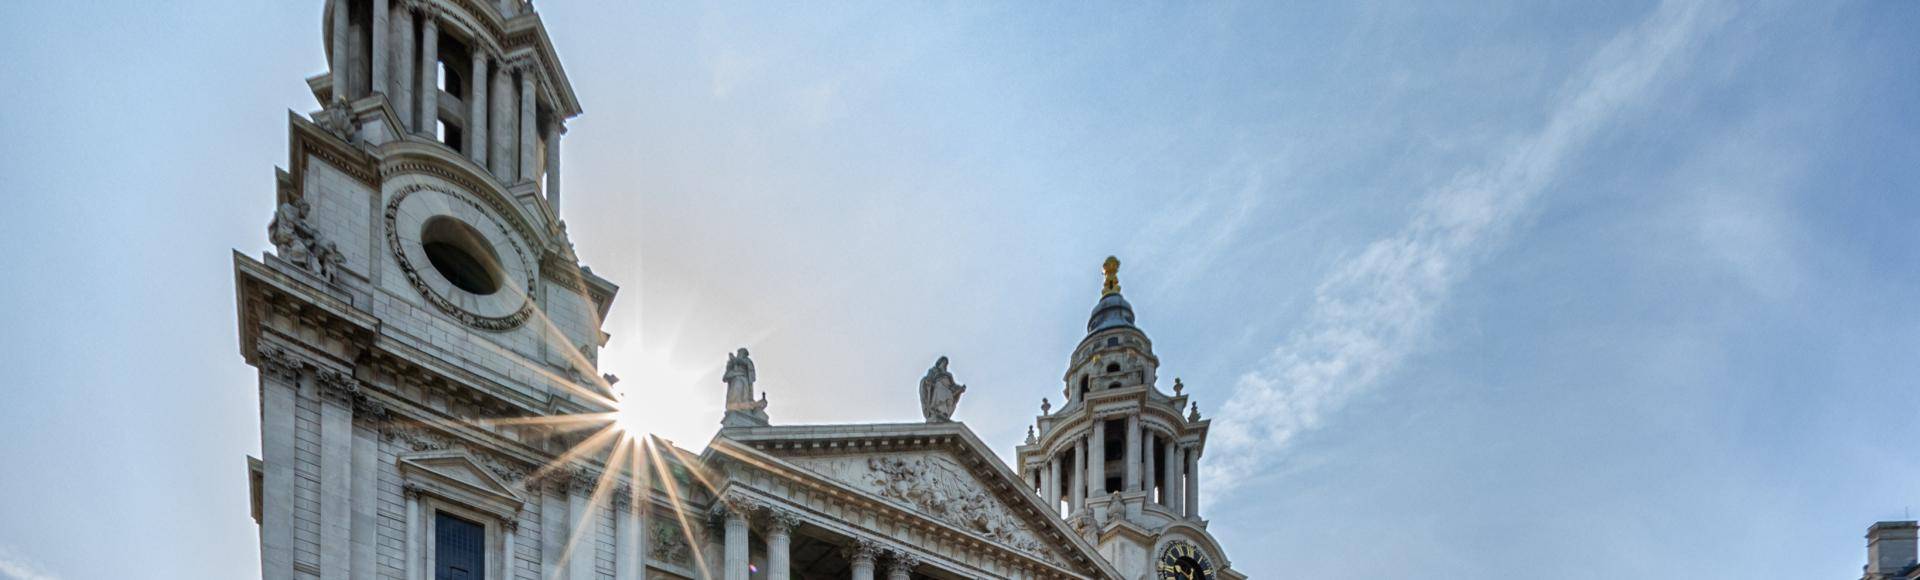 An image of the West front of St Paul's Cathedral in the sunshine